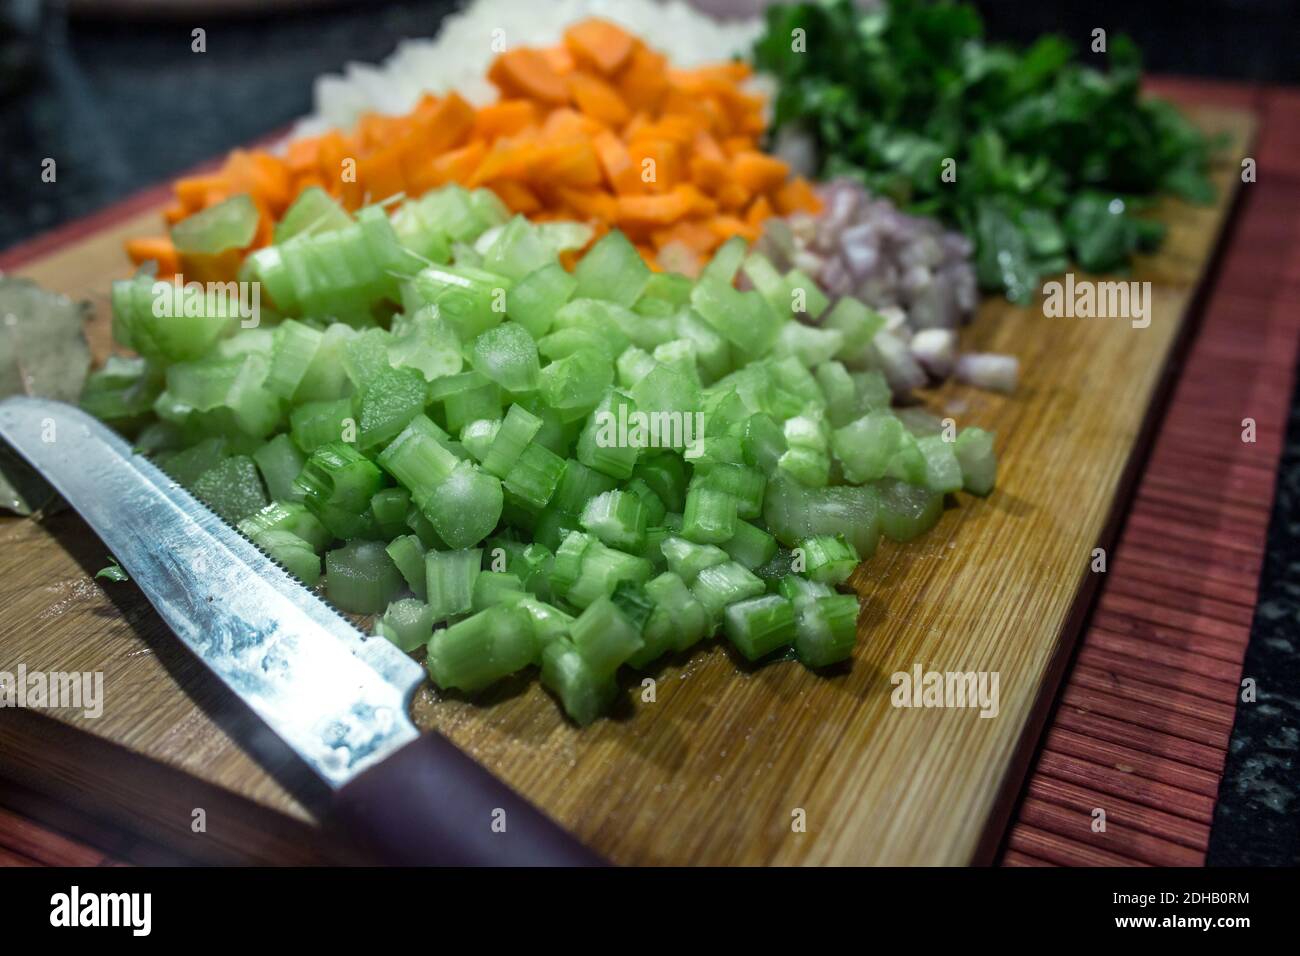 Mixed vegetables with brunoise cut for sautéing on a wooden cutting board (carrots, celery, onion and shallot) Stock Photo